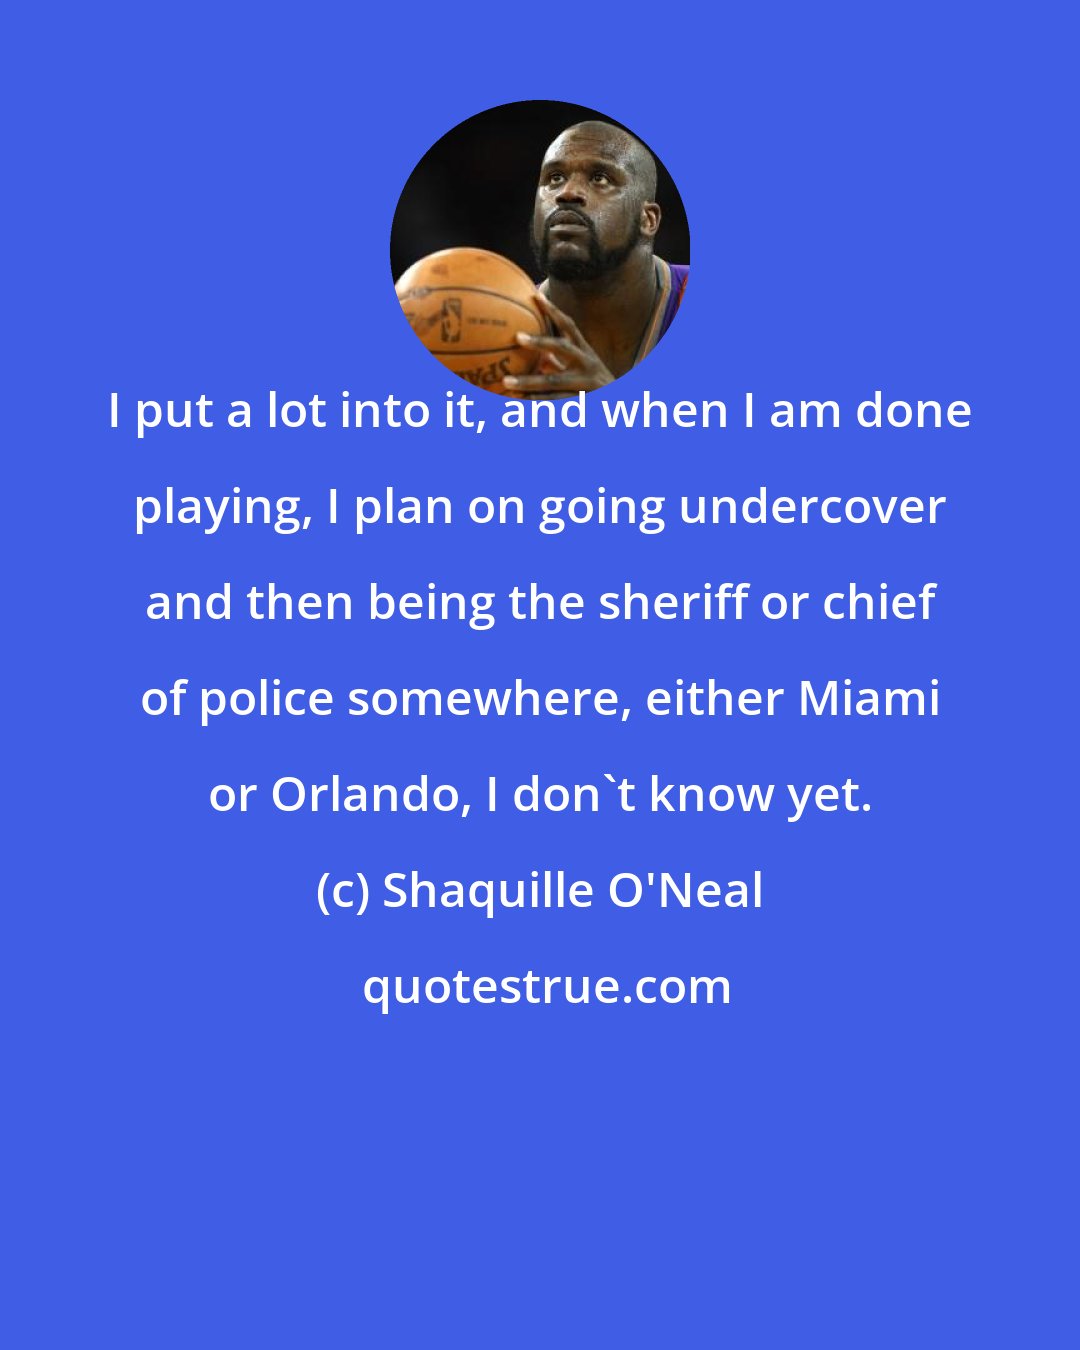 Shaquille O'Neal: I put a lot into it, and when I am done playing, I plan on going undercover and then being the sheriff or chief of police somewhere, either Miami or Orlando, I don't know yet.